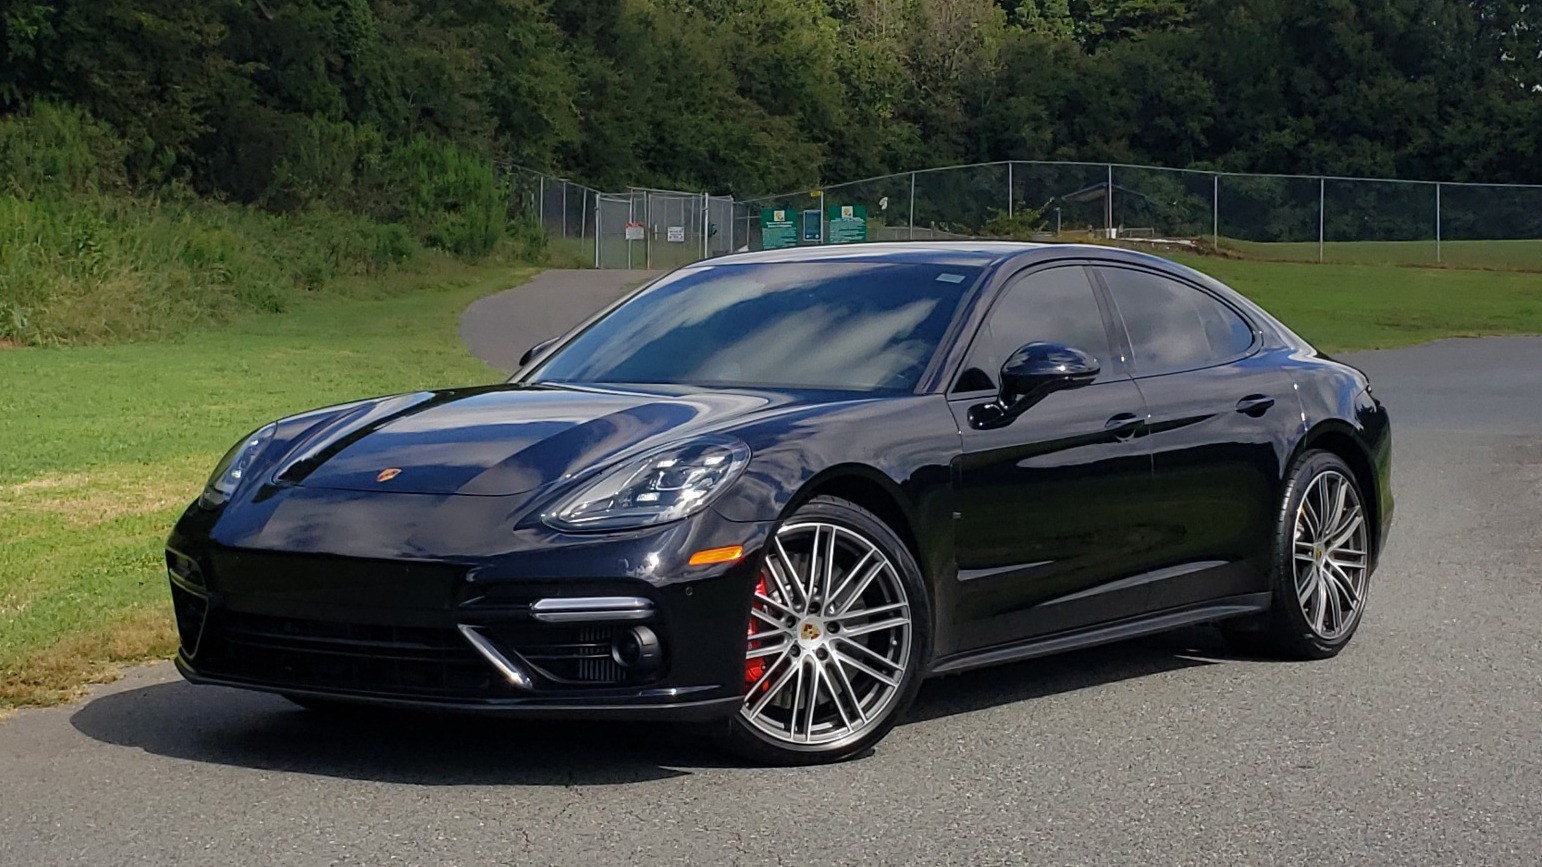 Used 2017 Porsche PANAMERA TURBO AWD / 4.0L V8 / AUTO / NAV / BOSE / REARVIEW / 21IN WHEELS for sale Sold at Formula Imports in Charlotte NC 28227 1